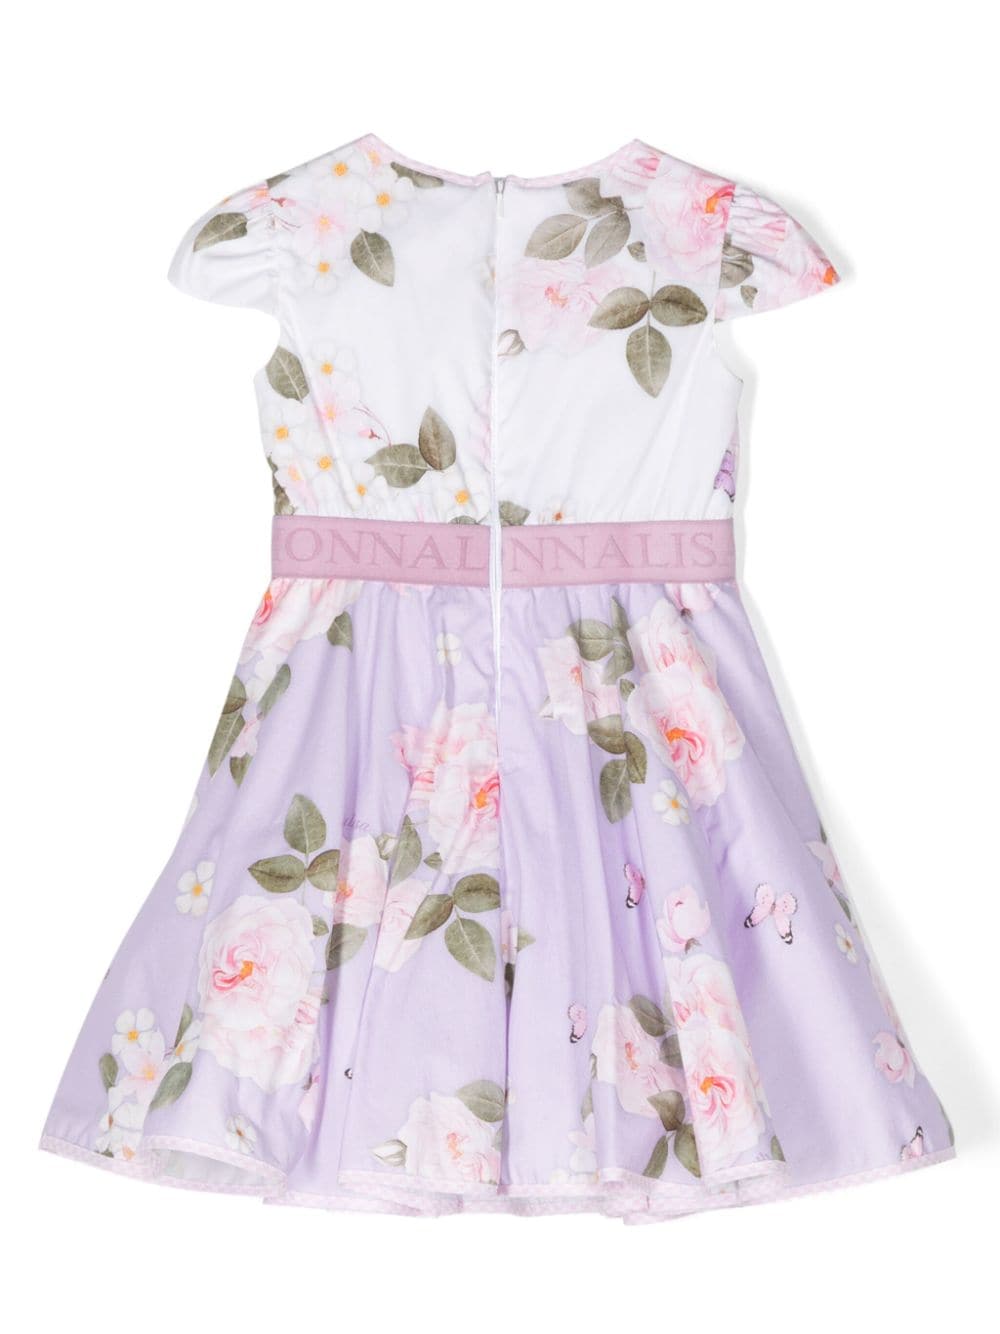 Lila dress for girls with floral print